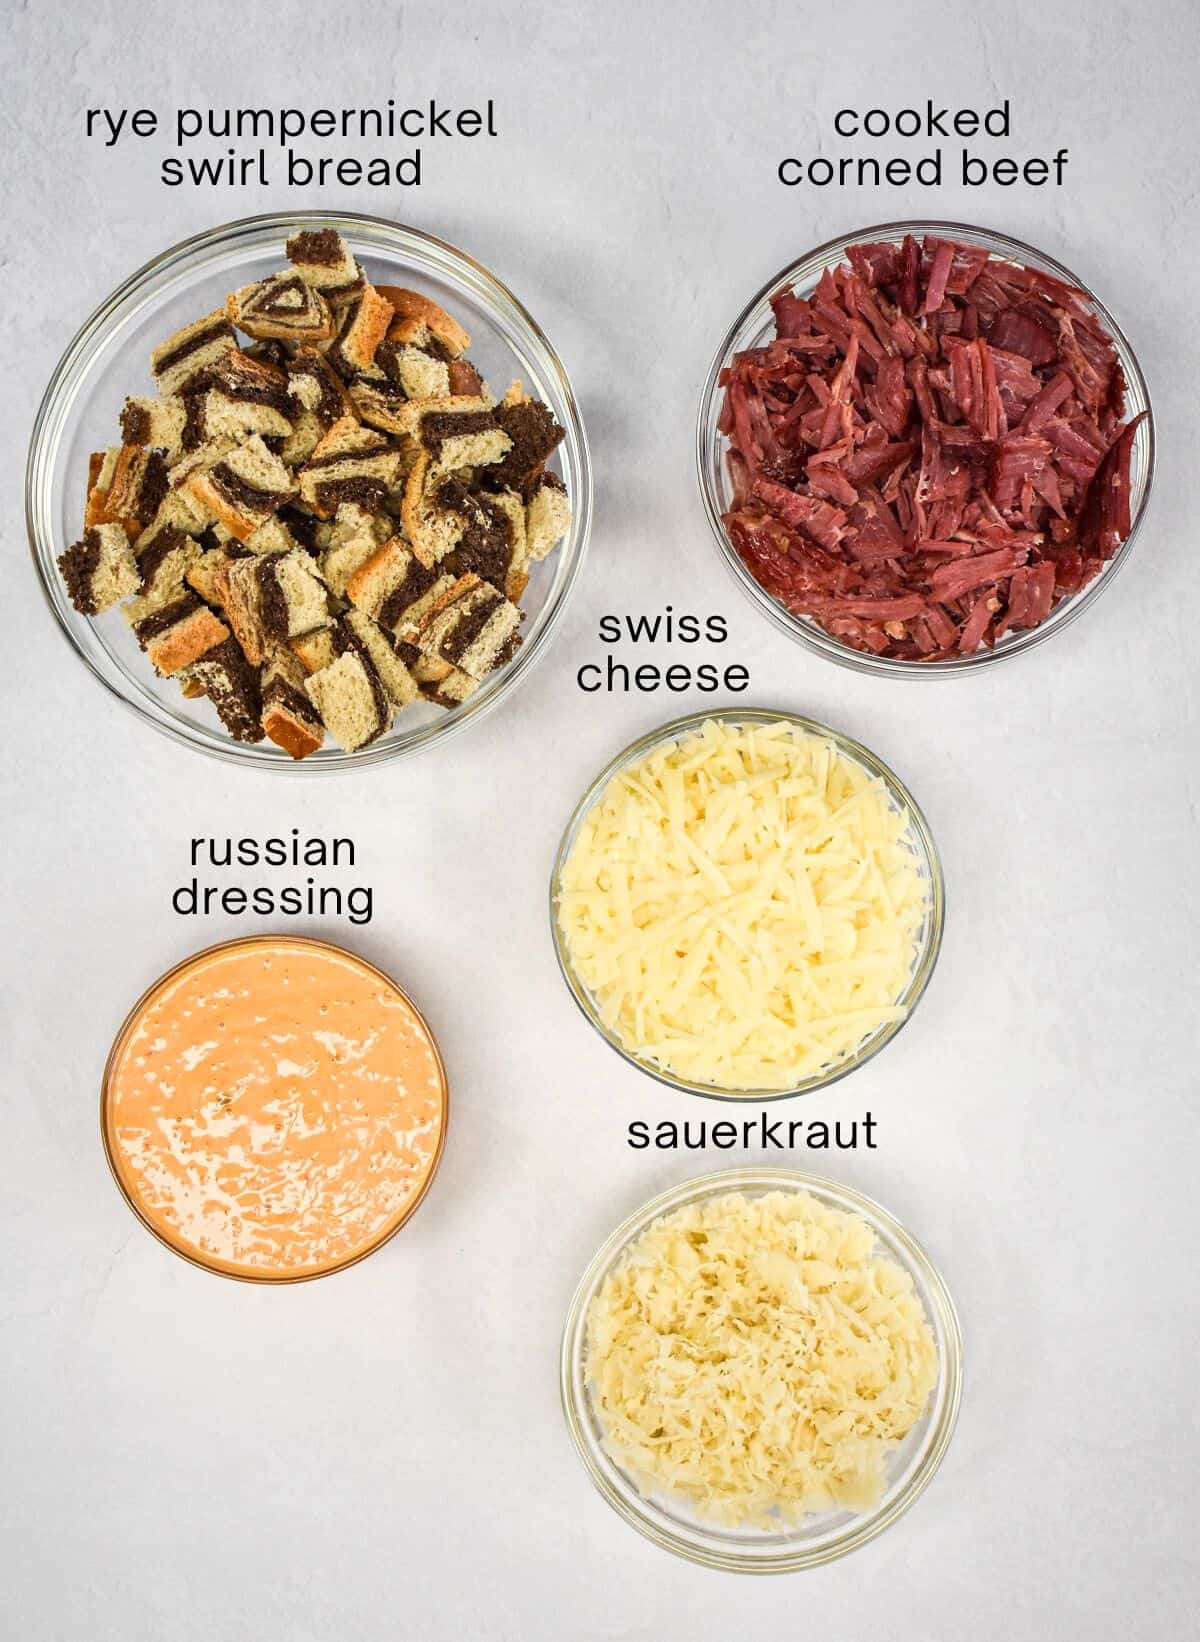 The ingredients for the casserole prepped and arranged in glass bowls on a white table with each labeled in small, black letters.